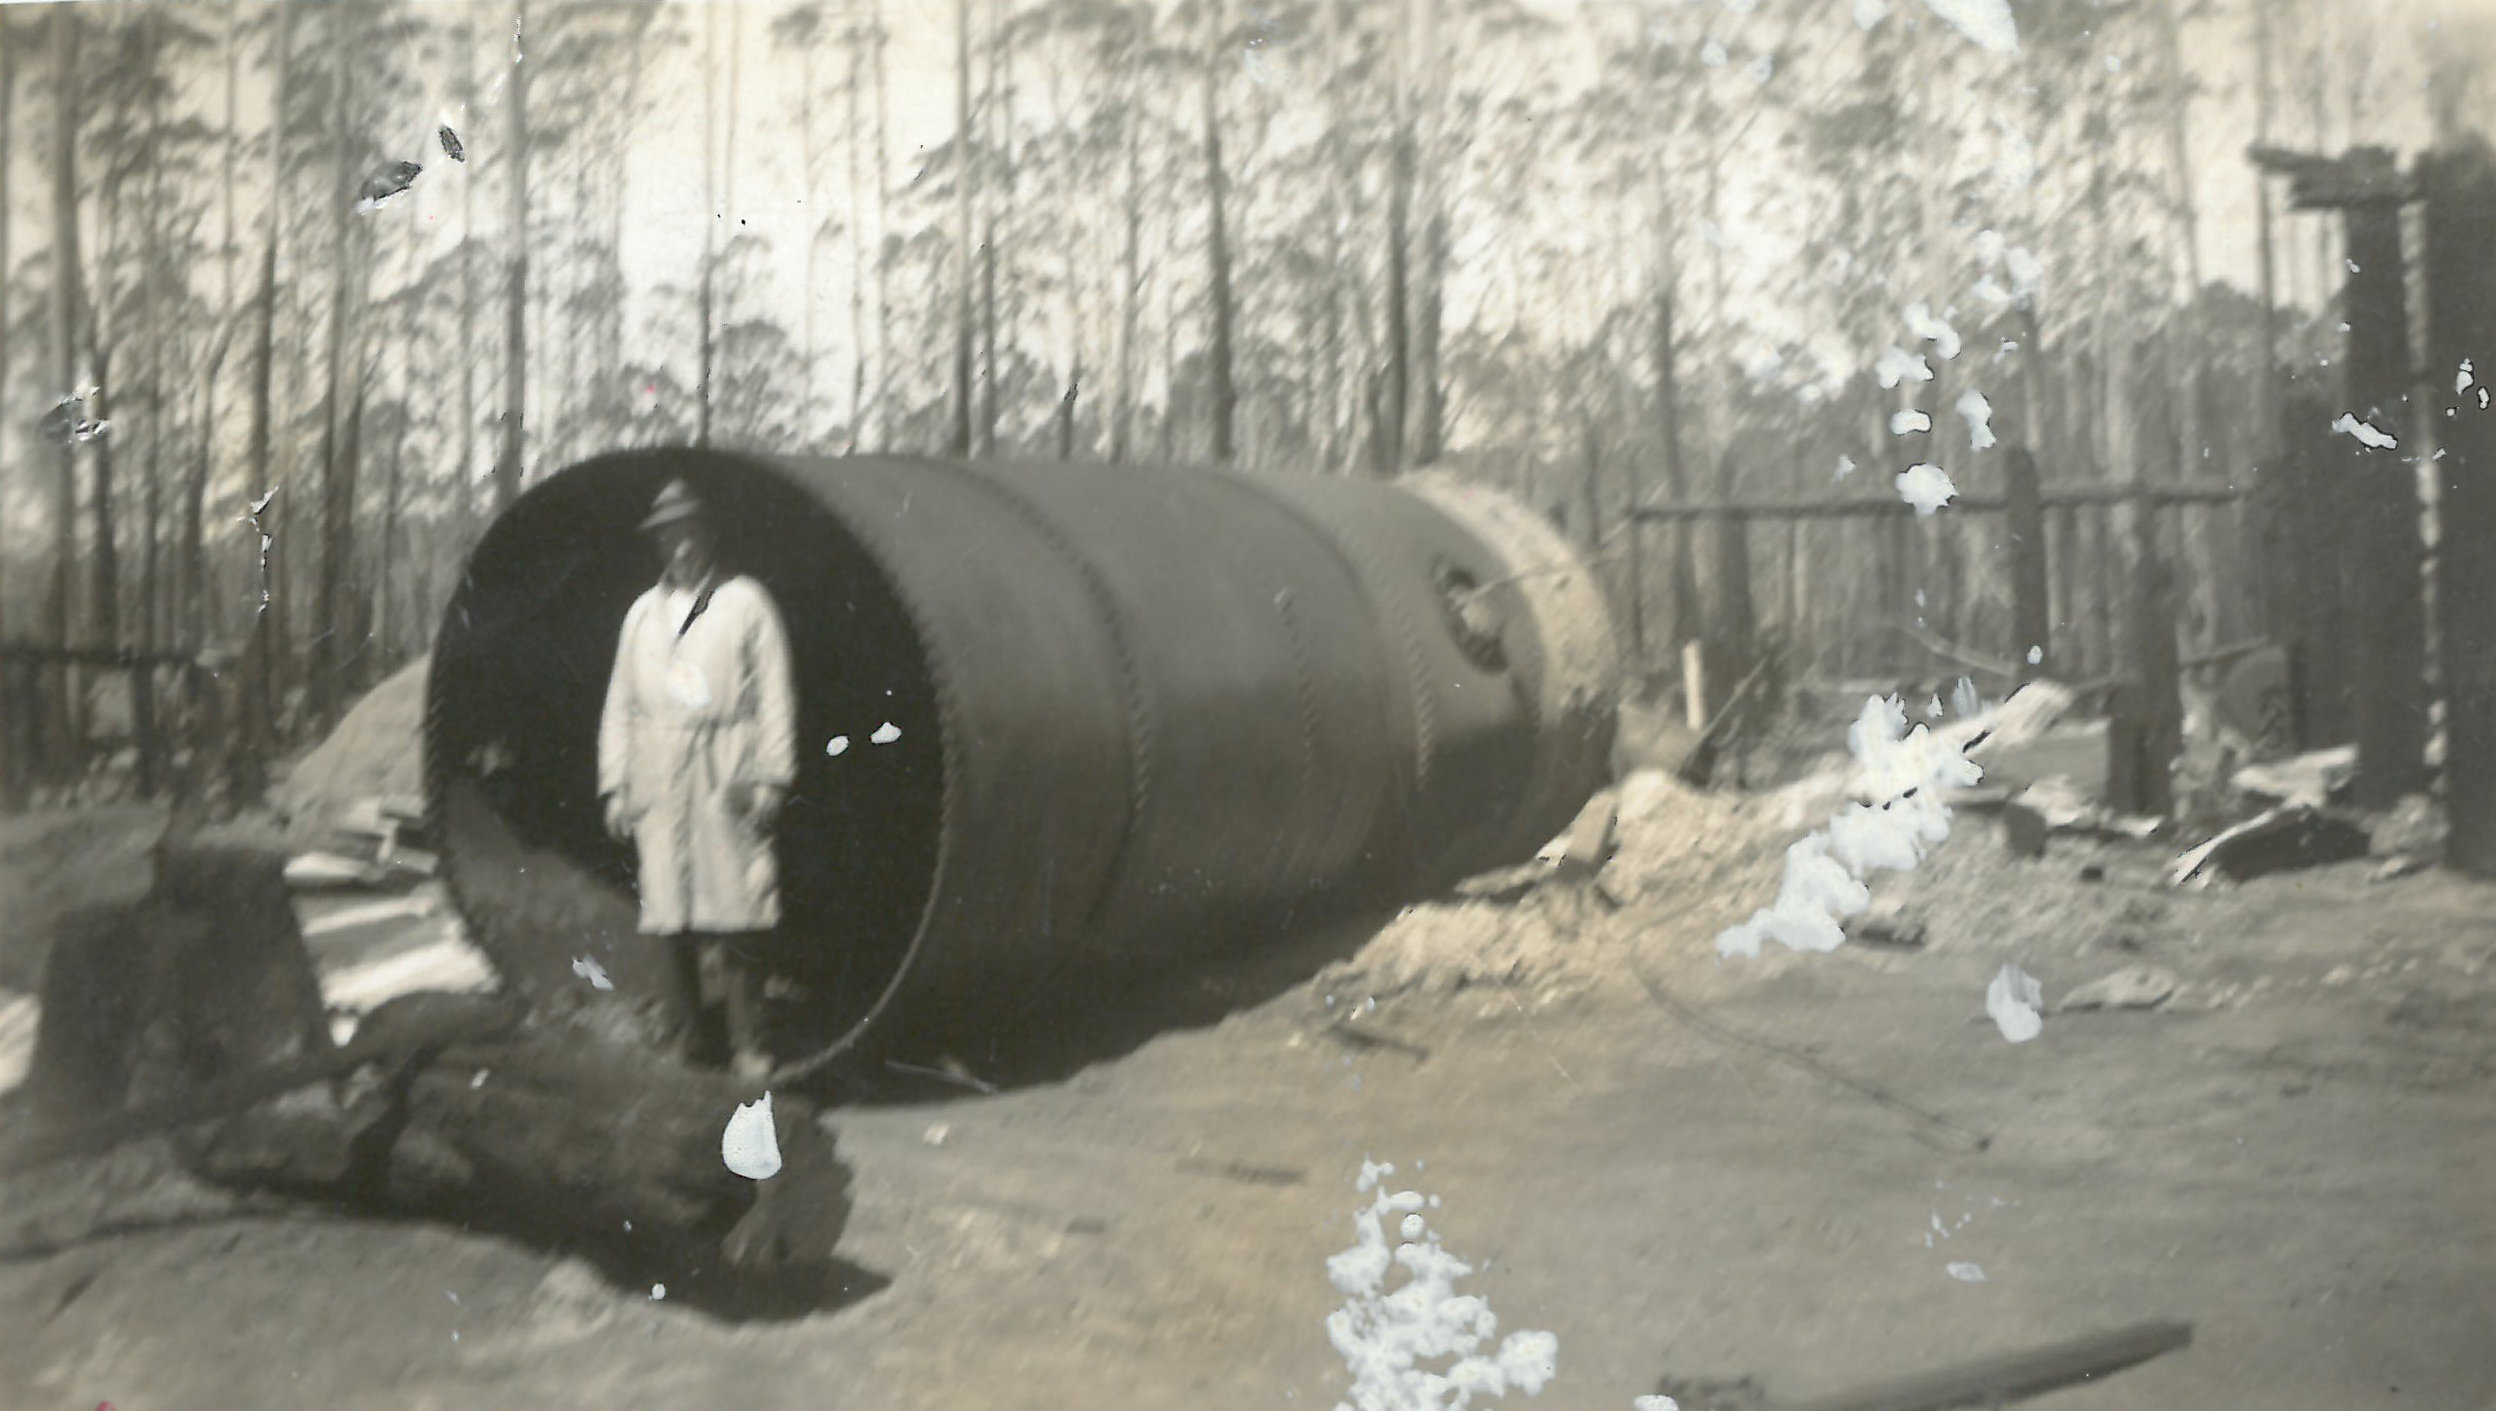 black and white photo of tank with burned landscape around and man in front